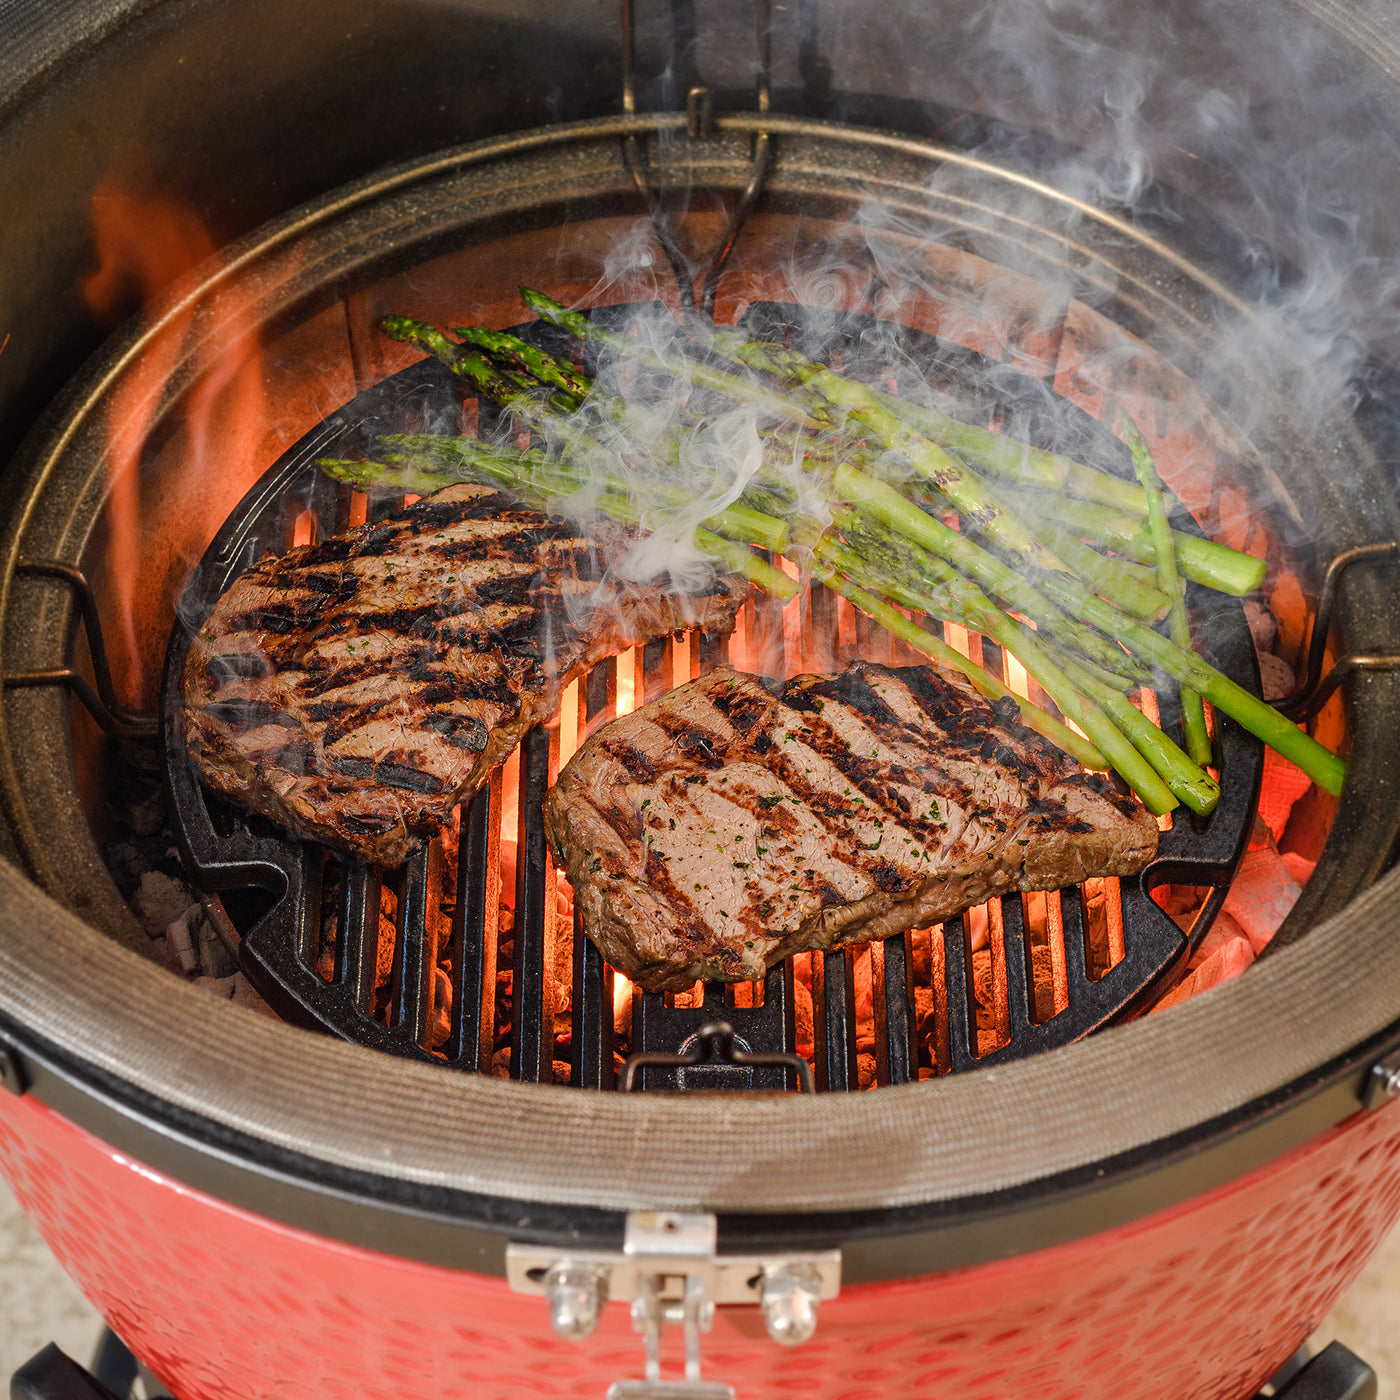 Kamado Joe Grill & Sear Plate. Now with 10% OFF. Only £75.99